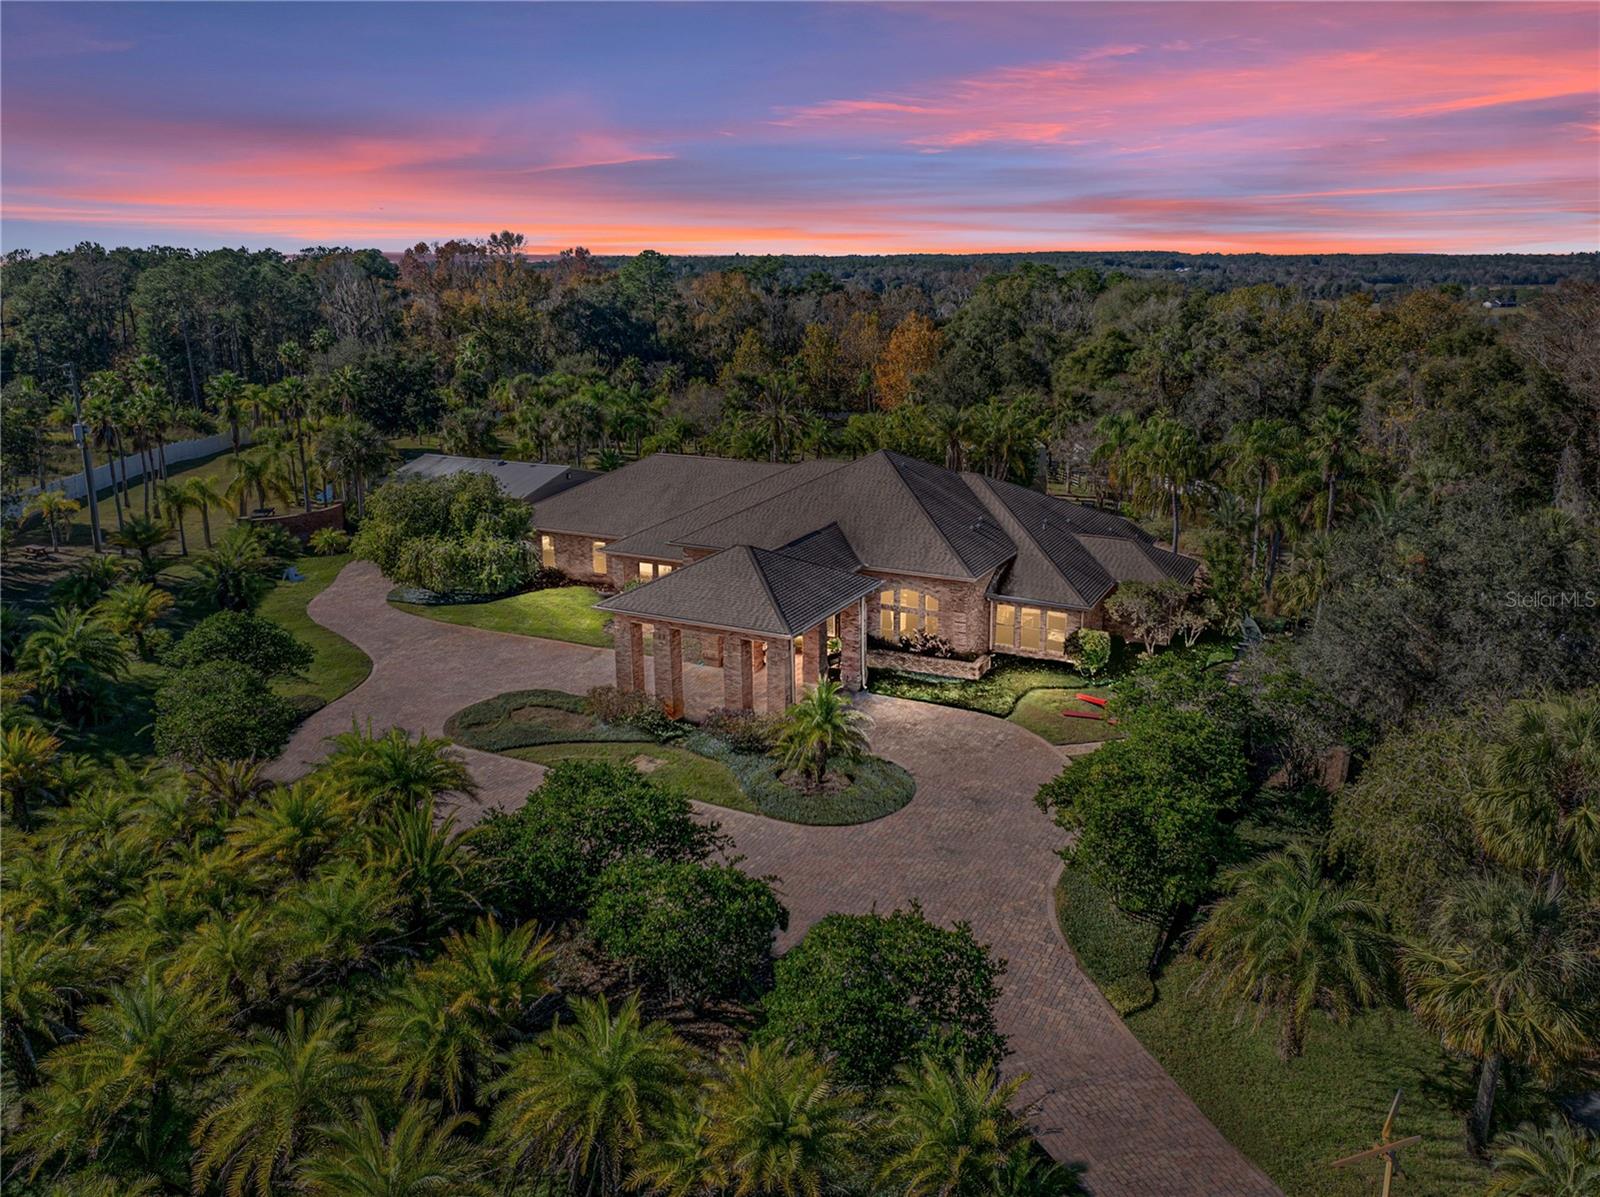 Exclusive and very private custom home with lagoon pool, hundreds of palms, separate guest home with separate entrance, 3 stocked ponds and all private fenced.